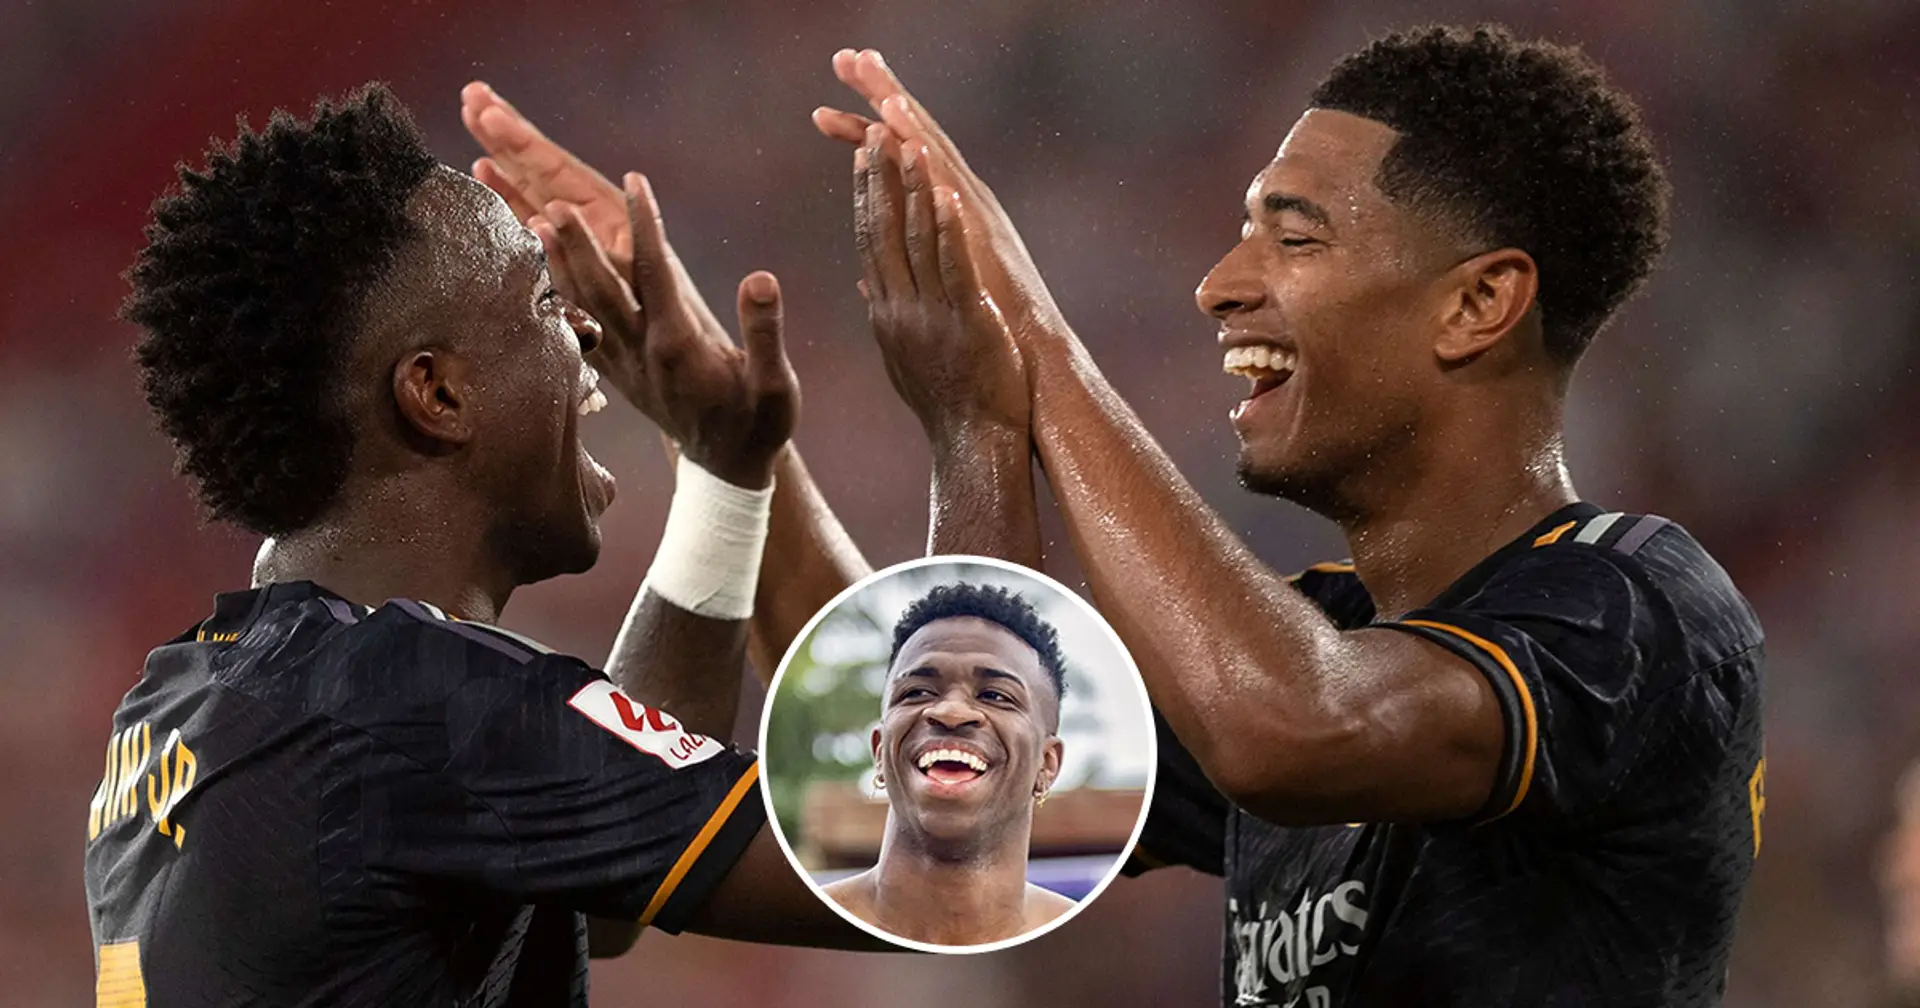 Vinicius ridiculed Barcelona's leader after winning La Liga title - he reminded him of an old interview